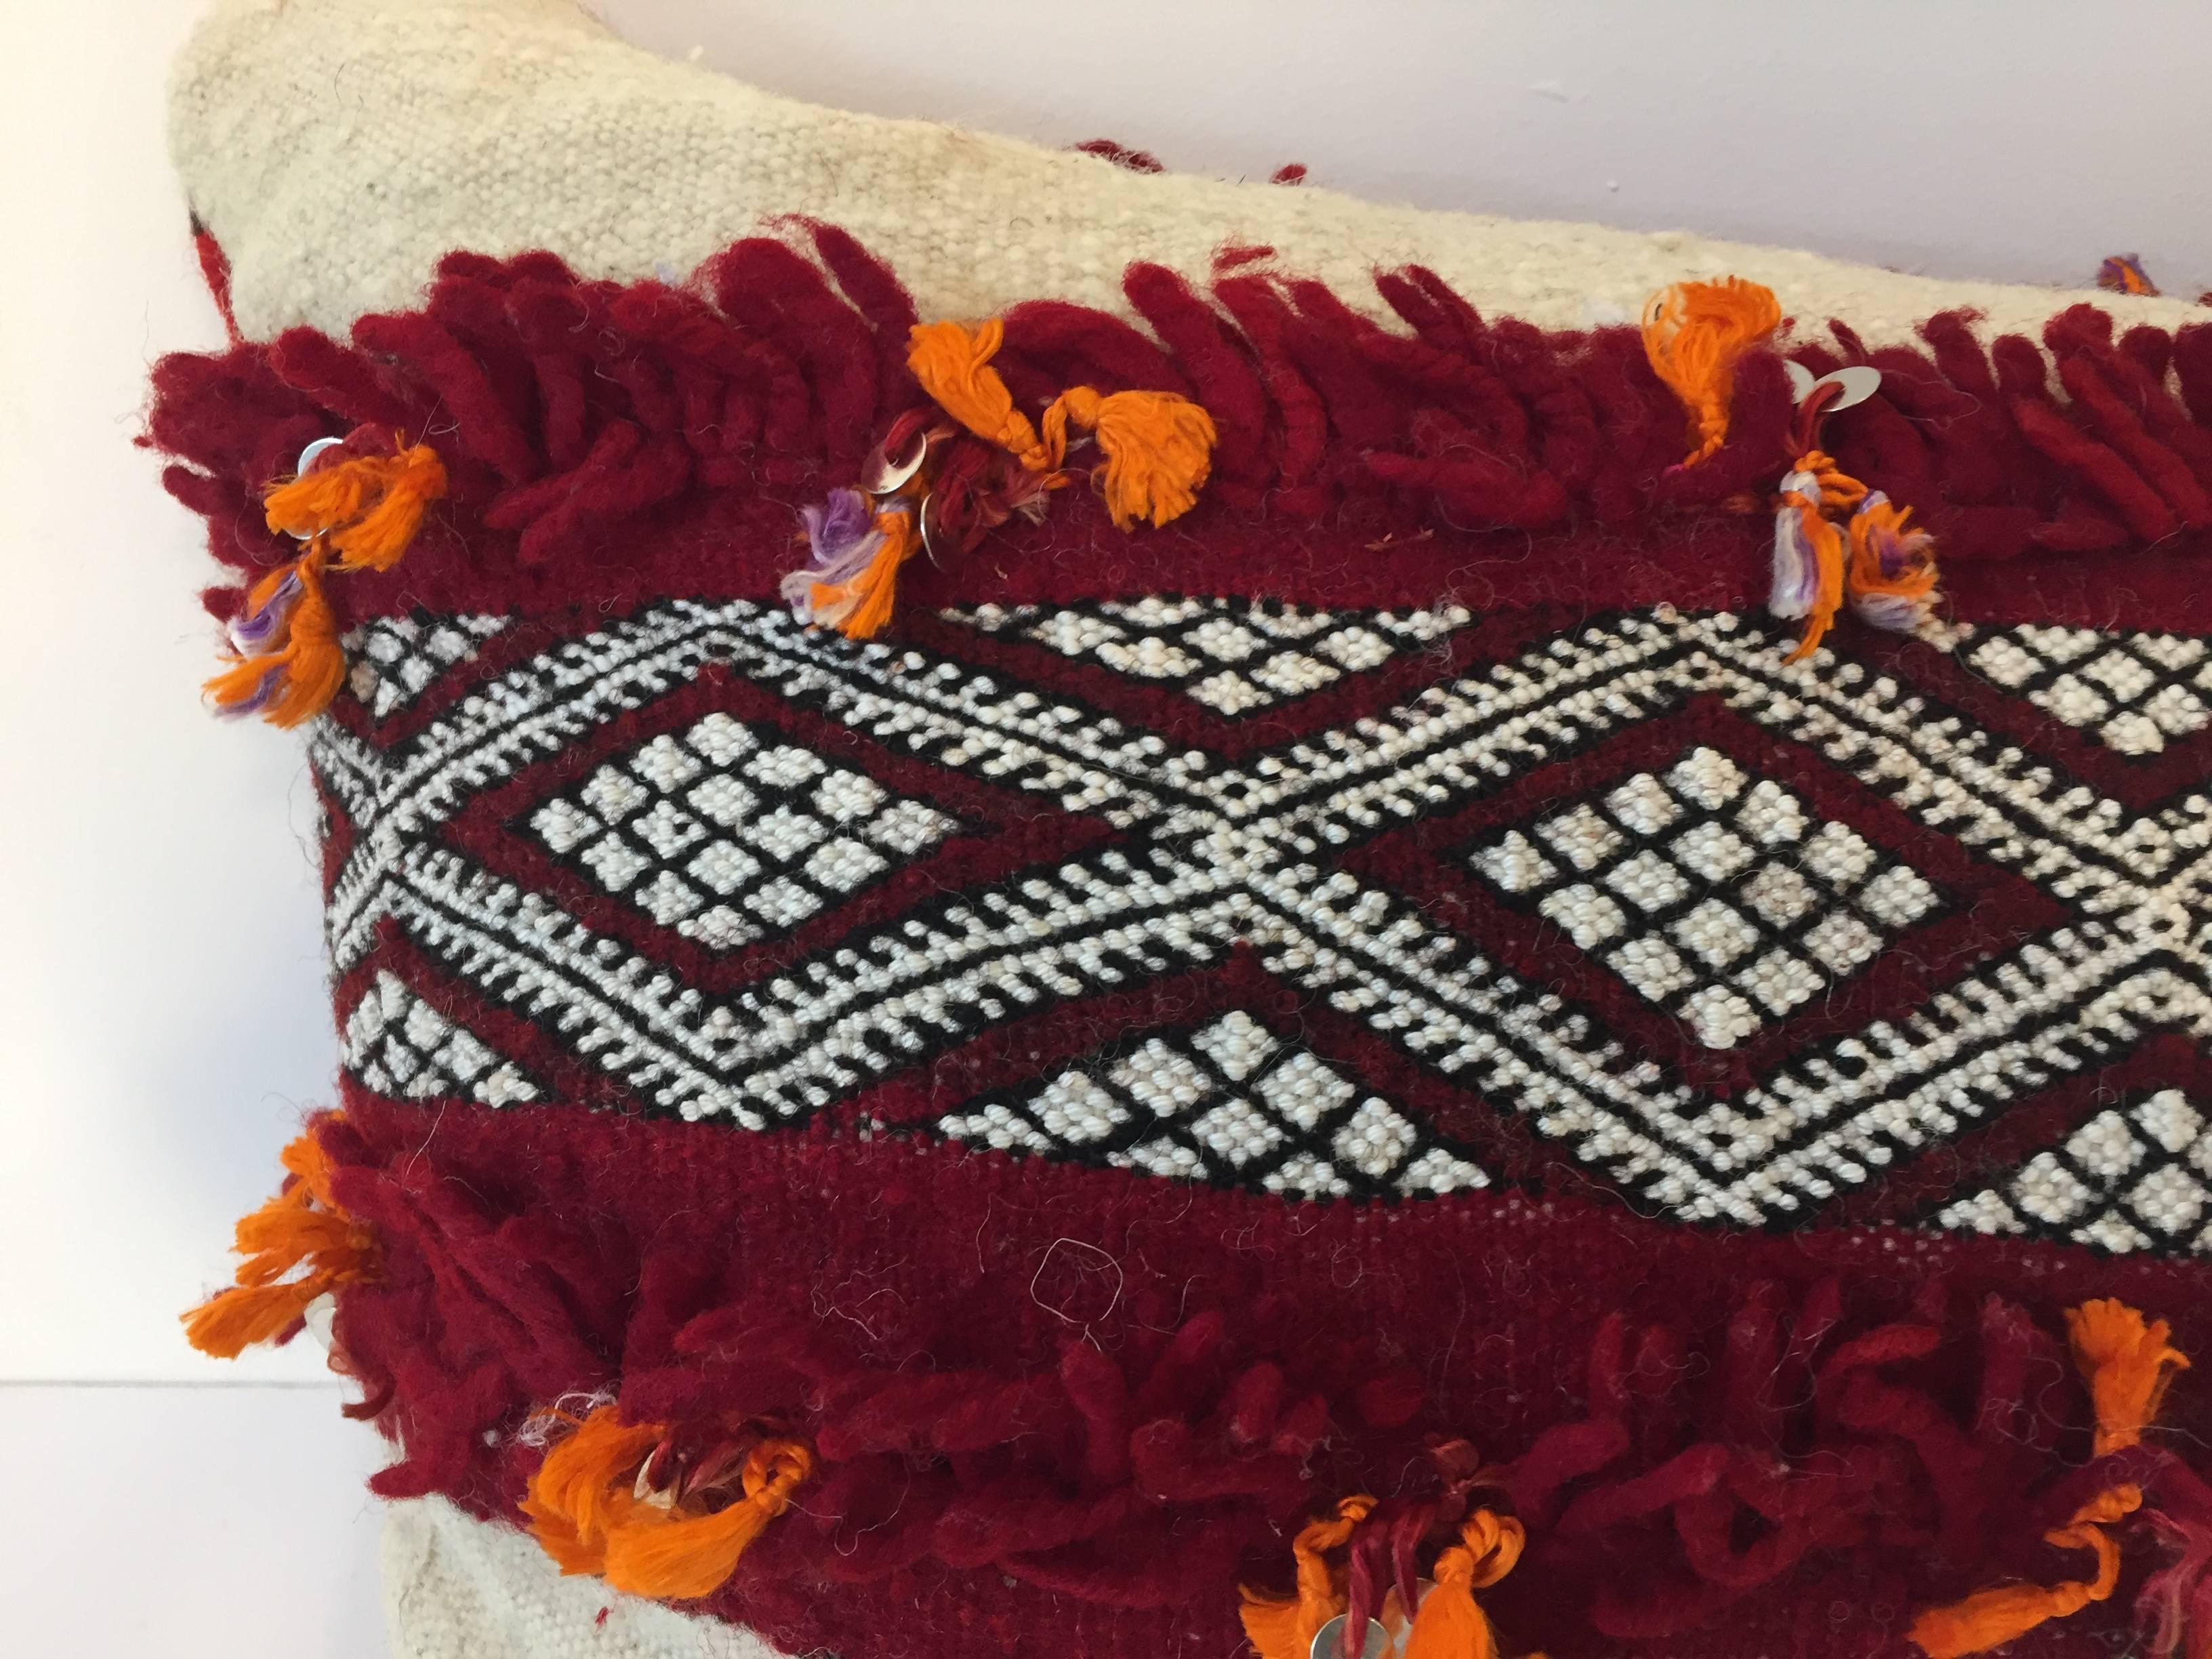 Moroccan Berber pillow white and red with geometric tribal designs.
Handwoven tribal throw pillow made from a vintage flat-weave rug. 
Made from Tribal Moroccan rug, he front and the back are made from a different Moroccan carpet, the front is more